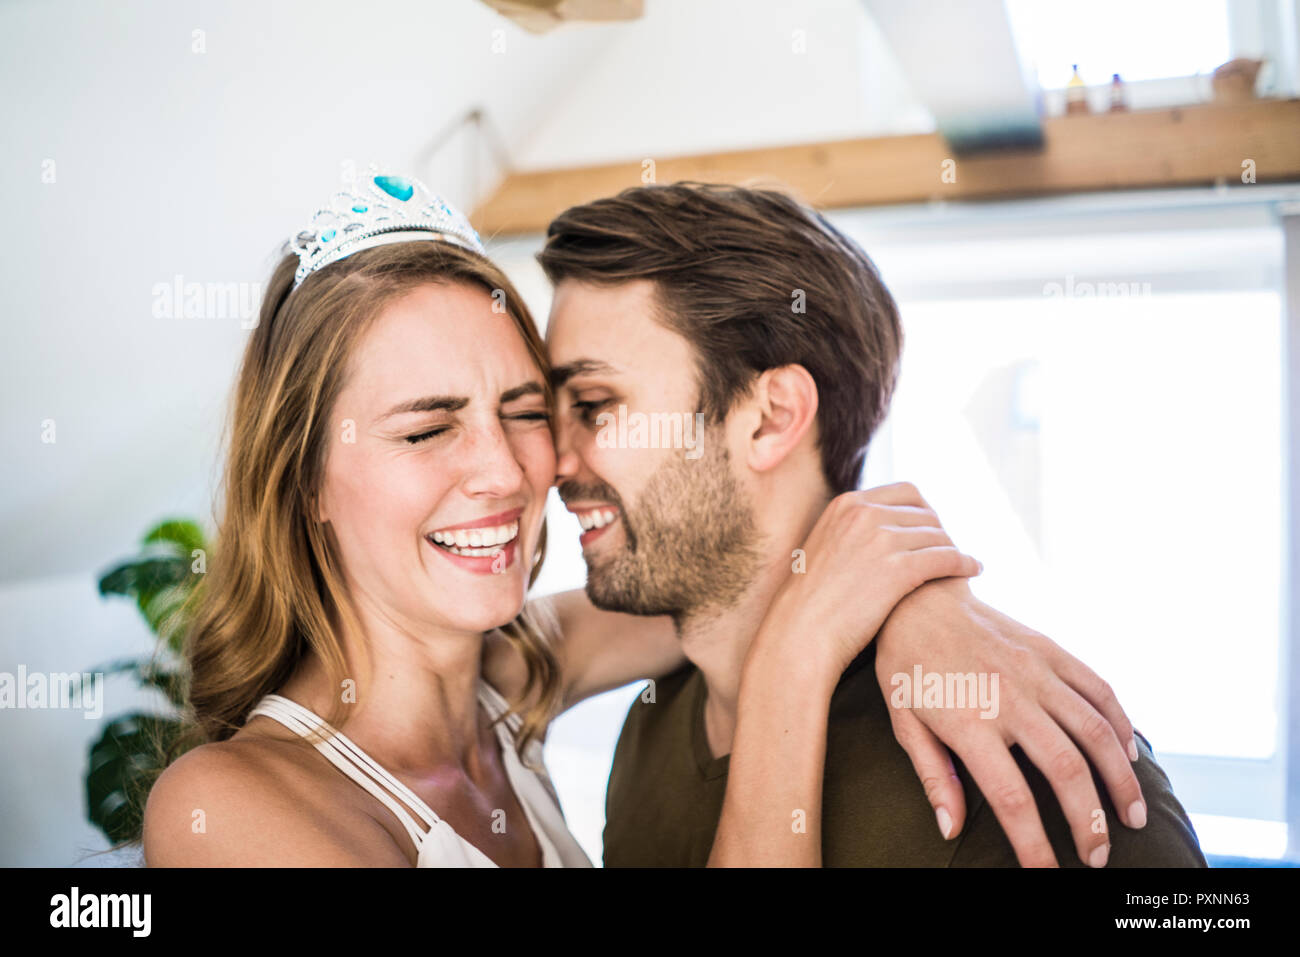 Happy couple at home with woman wearing tiara Stock Photo